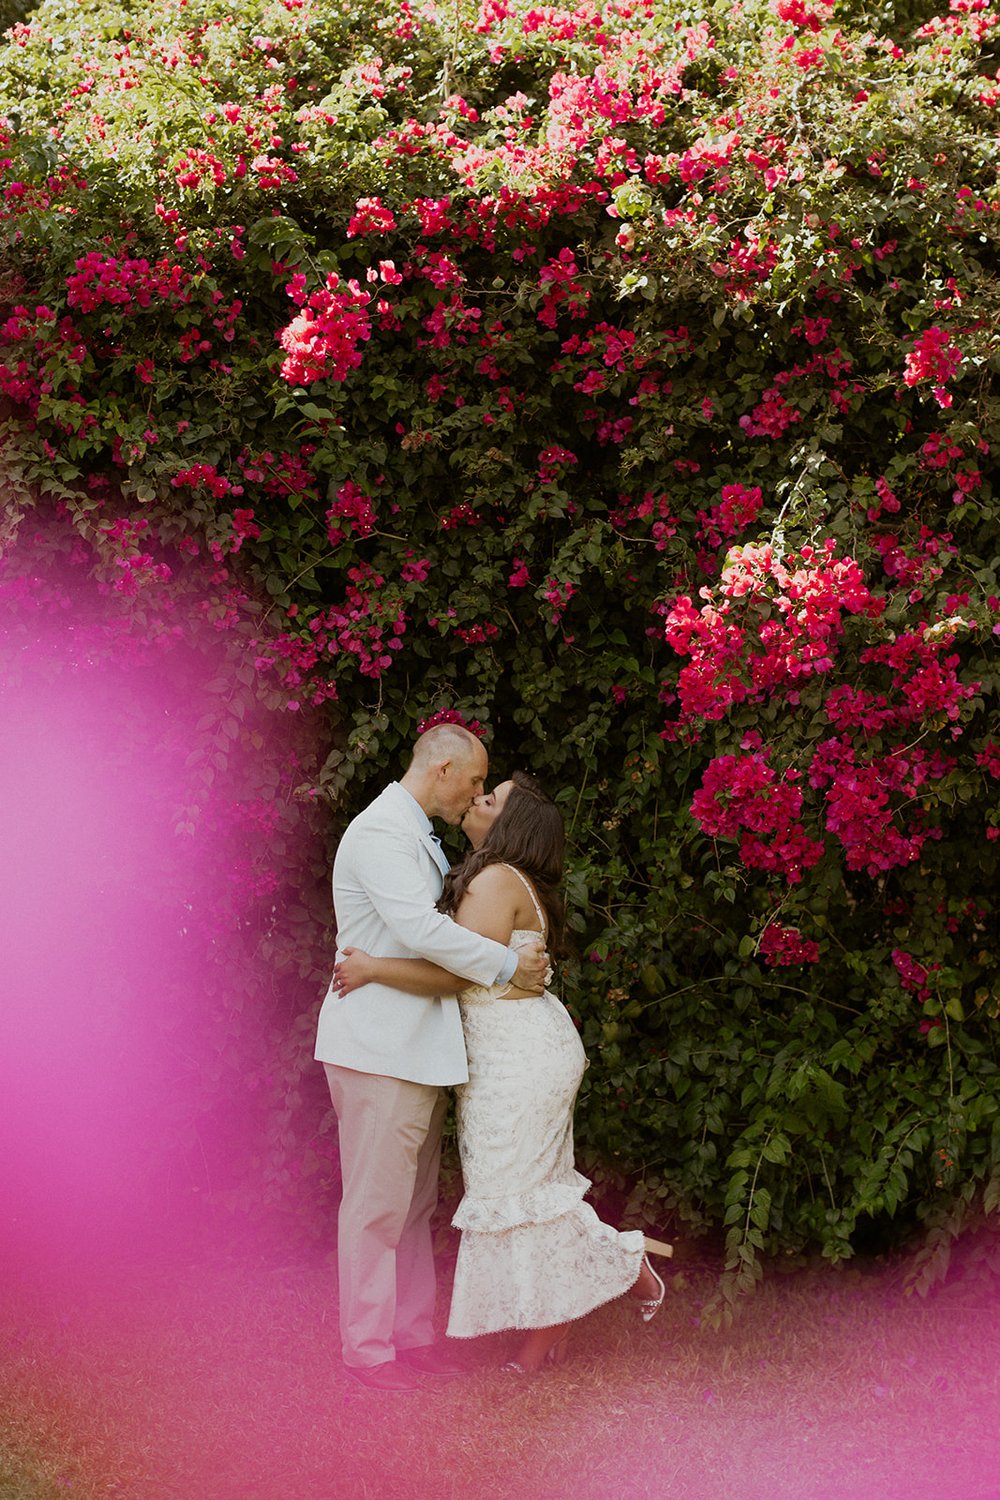 Gigi steals a kiss from her groom while hiding in lush pink florals. 